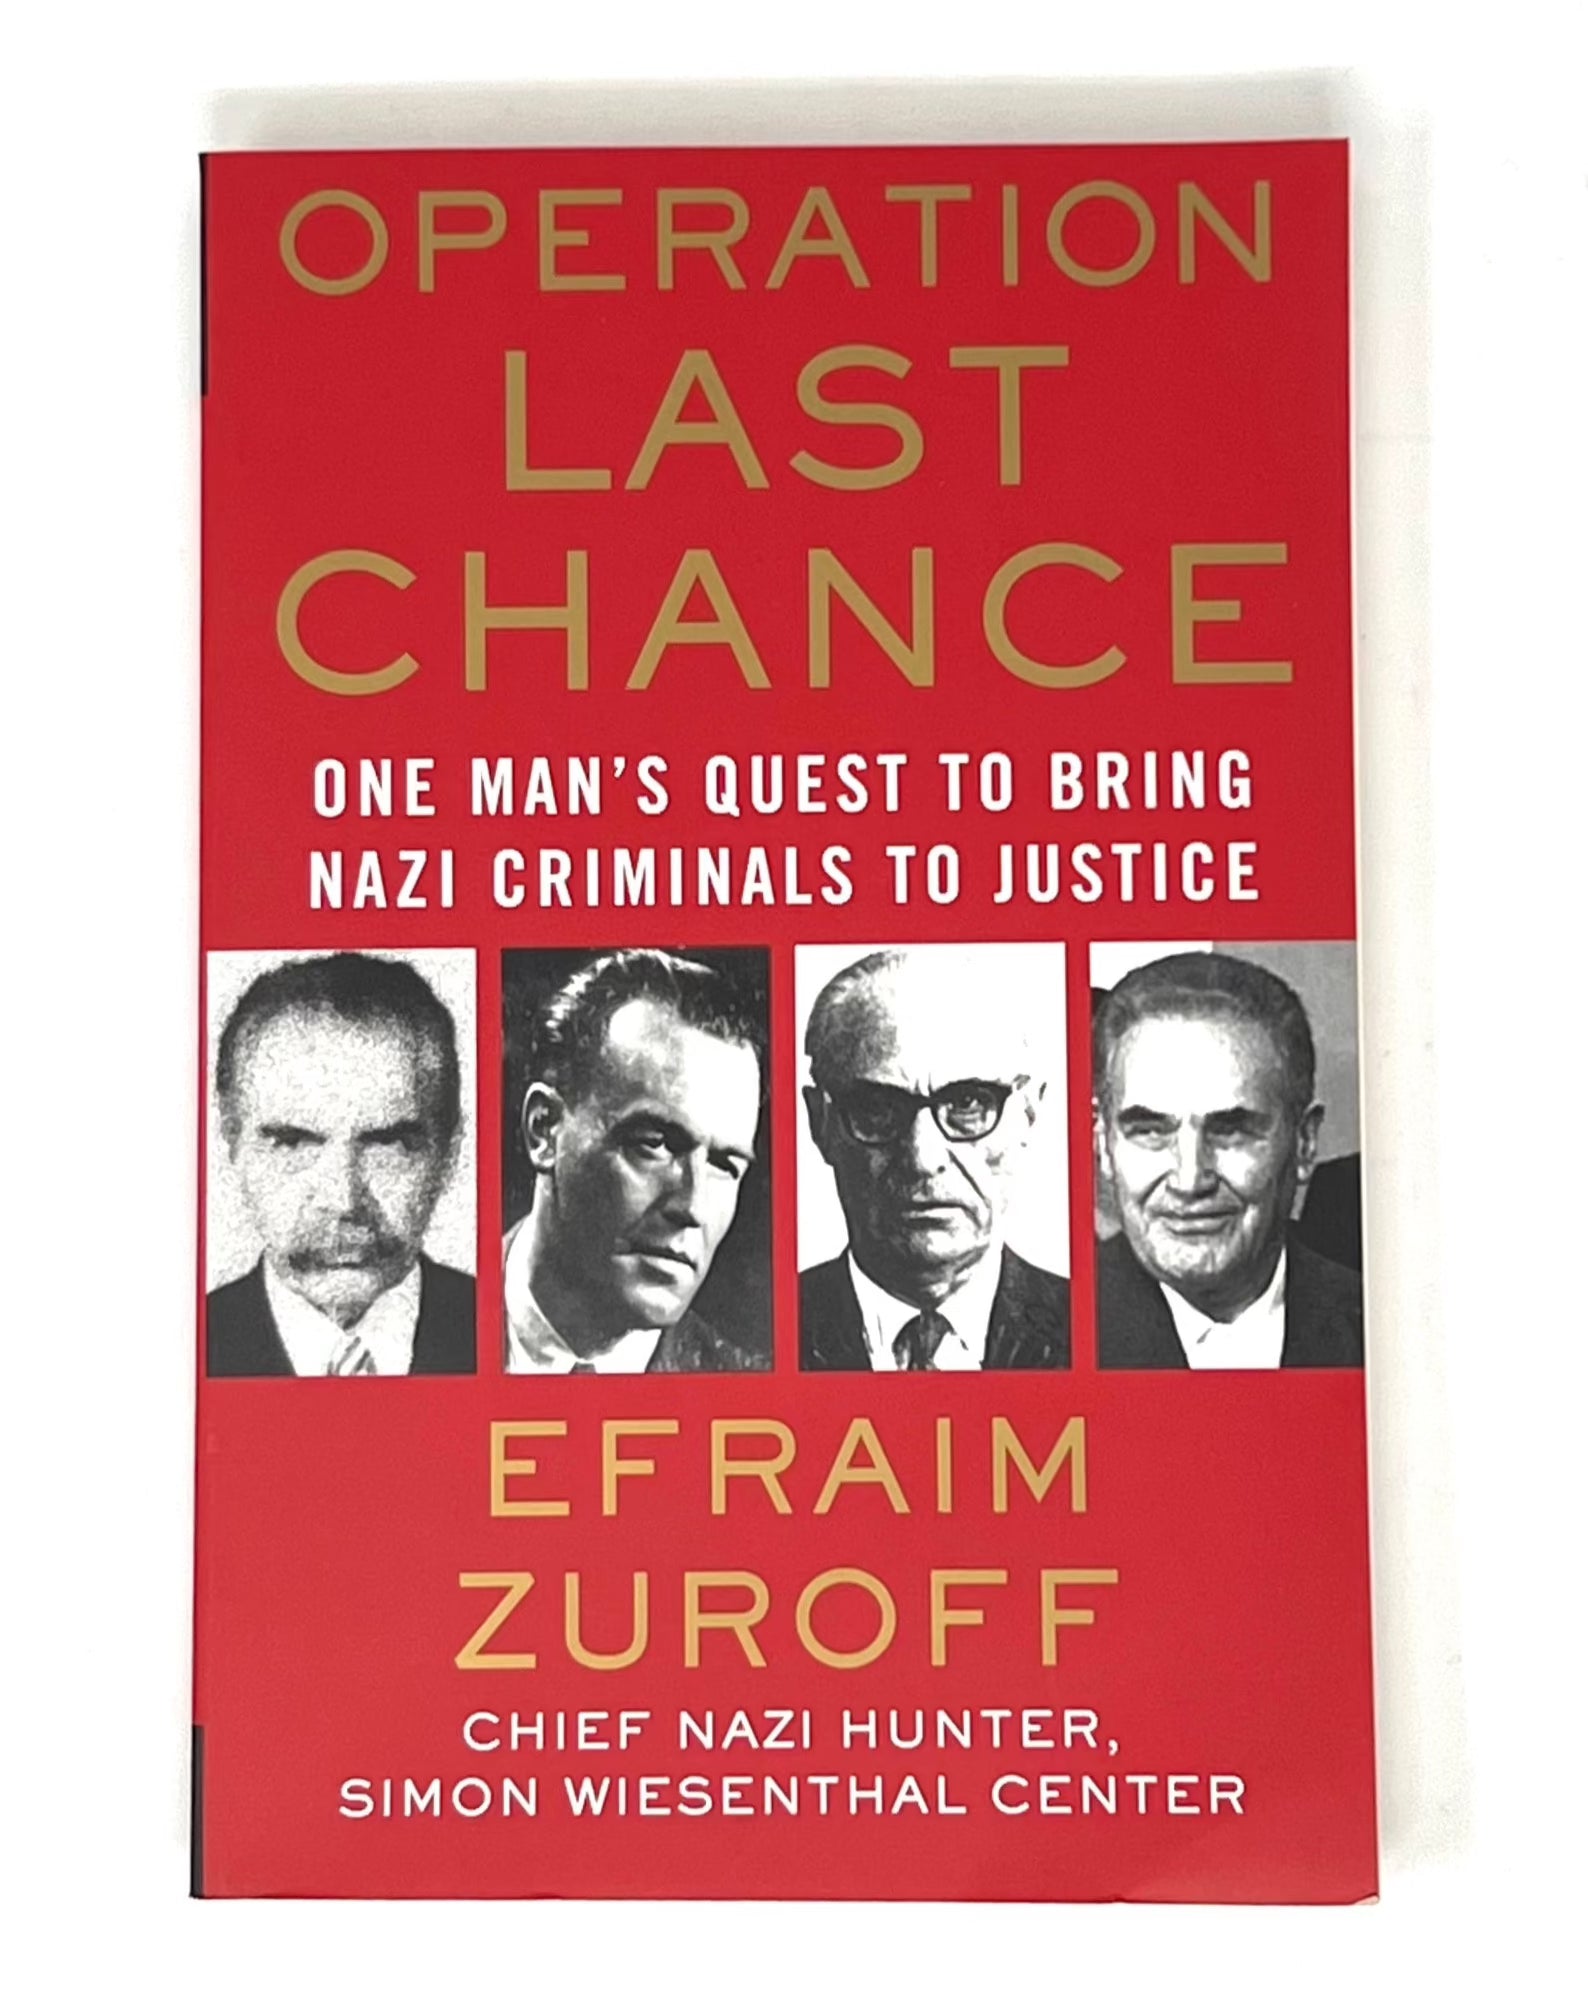 Operation Last Chance: One Man's Quest to Bring Nazi Criminals to Justice